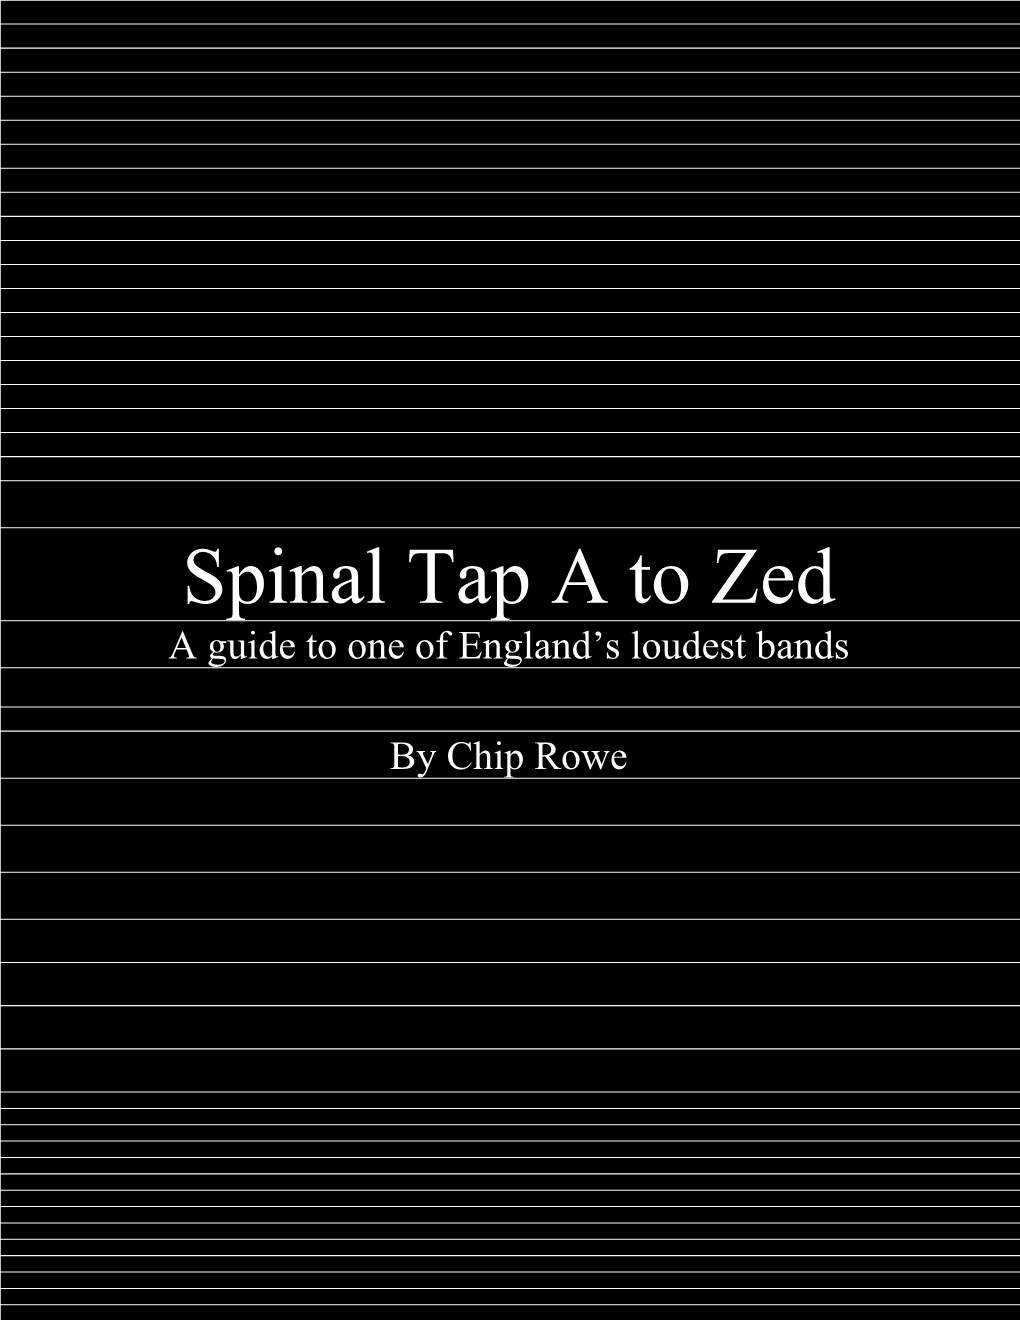 Spinal Tap a to Zed: a Guide to One of England's Loudest Bands